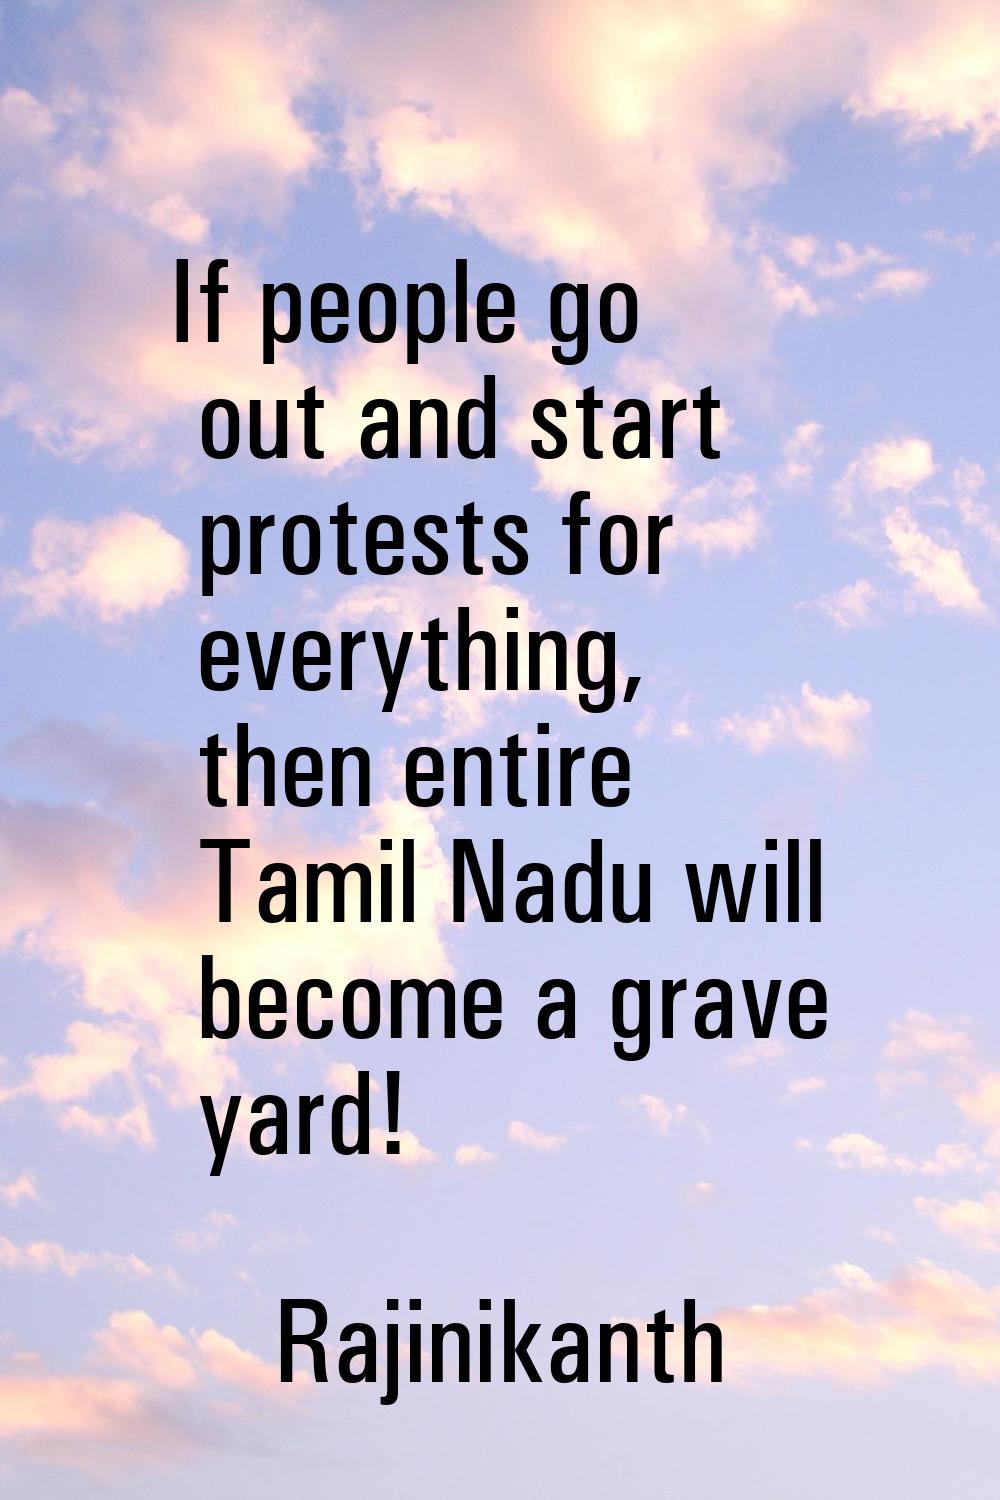 If people go out and start protests for everything, then entire Tamil Nadu will become a grave yard